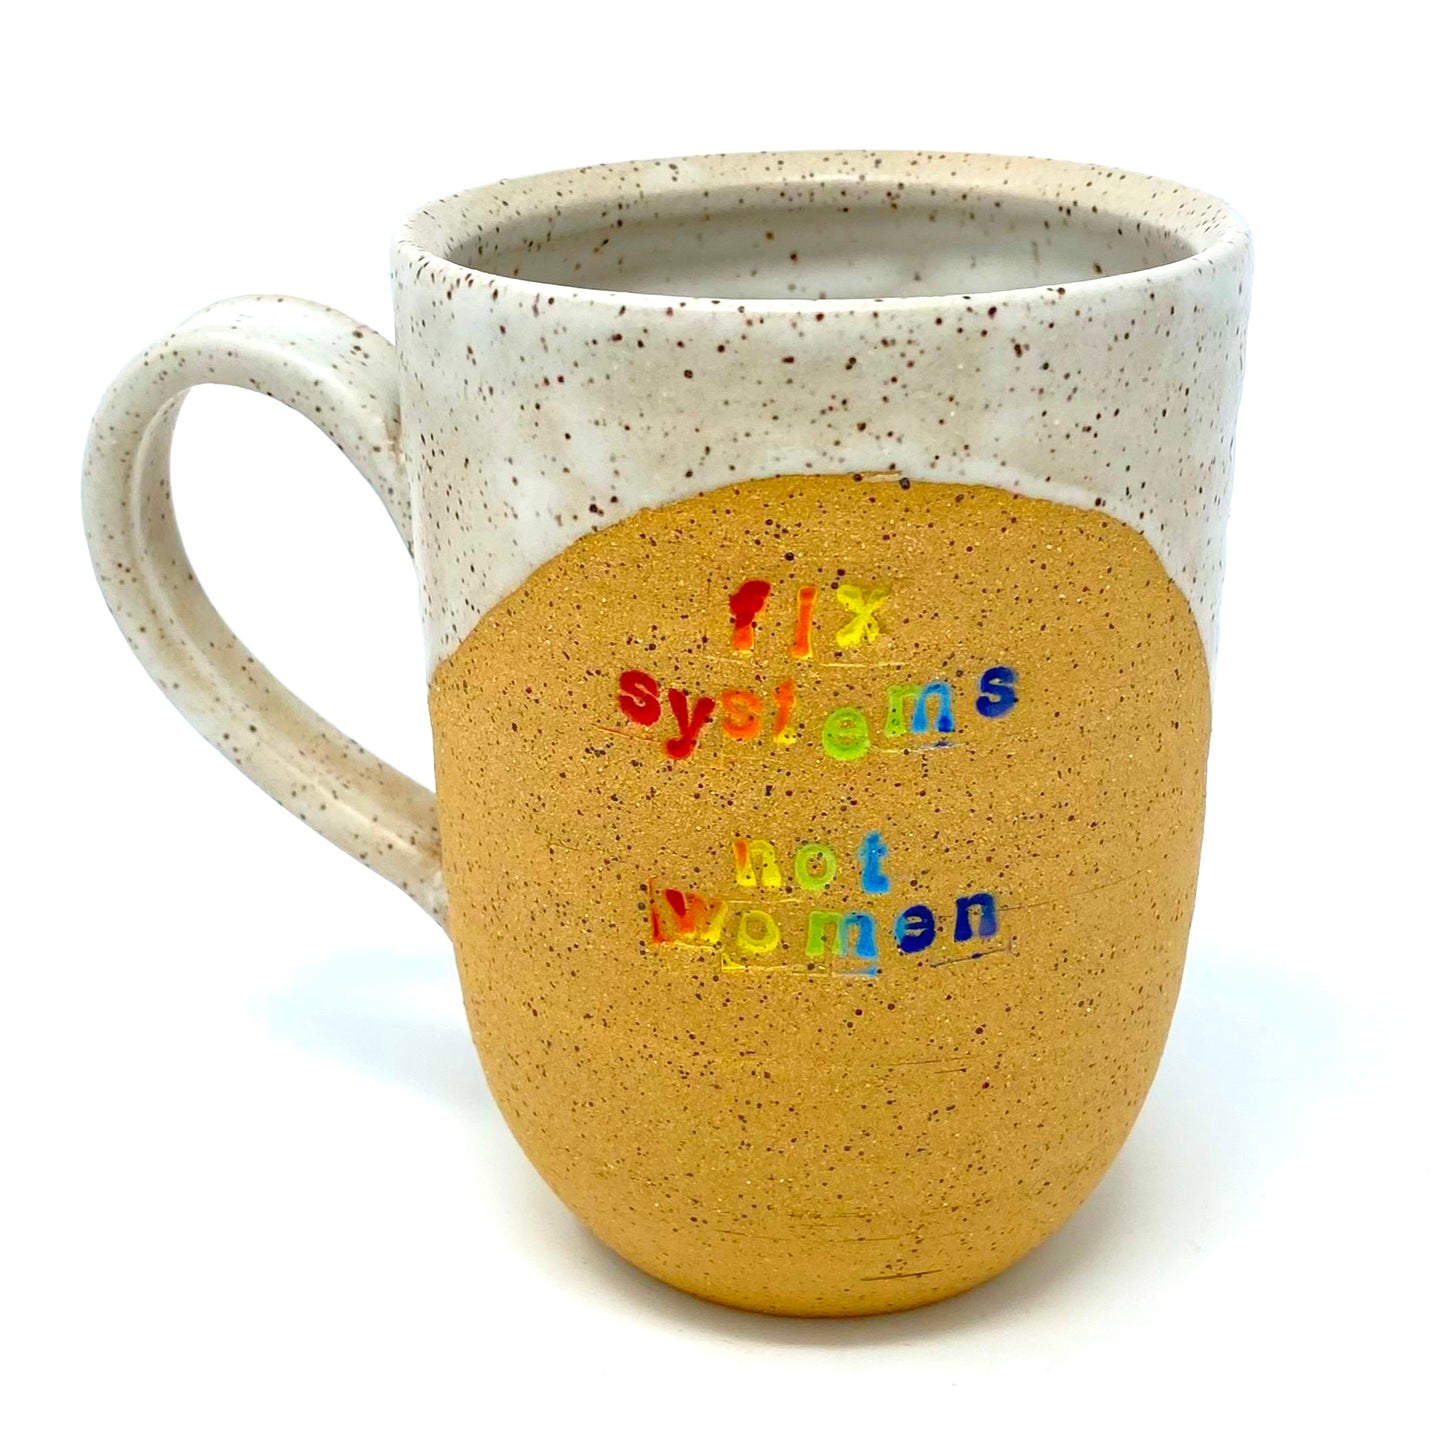 tan stoneware mug as seen from the front. the words "fix systems not women" are inlaid in rainbow color, with white glaze swooping from the inside around the rim and down the handle.